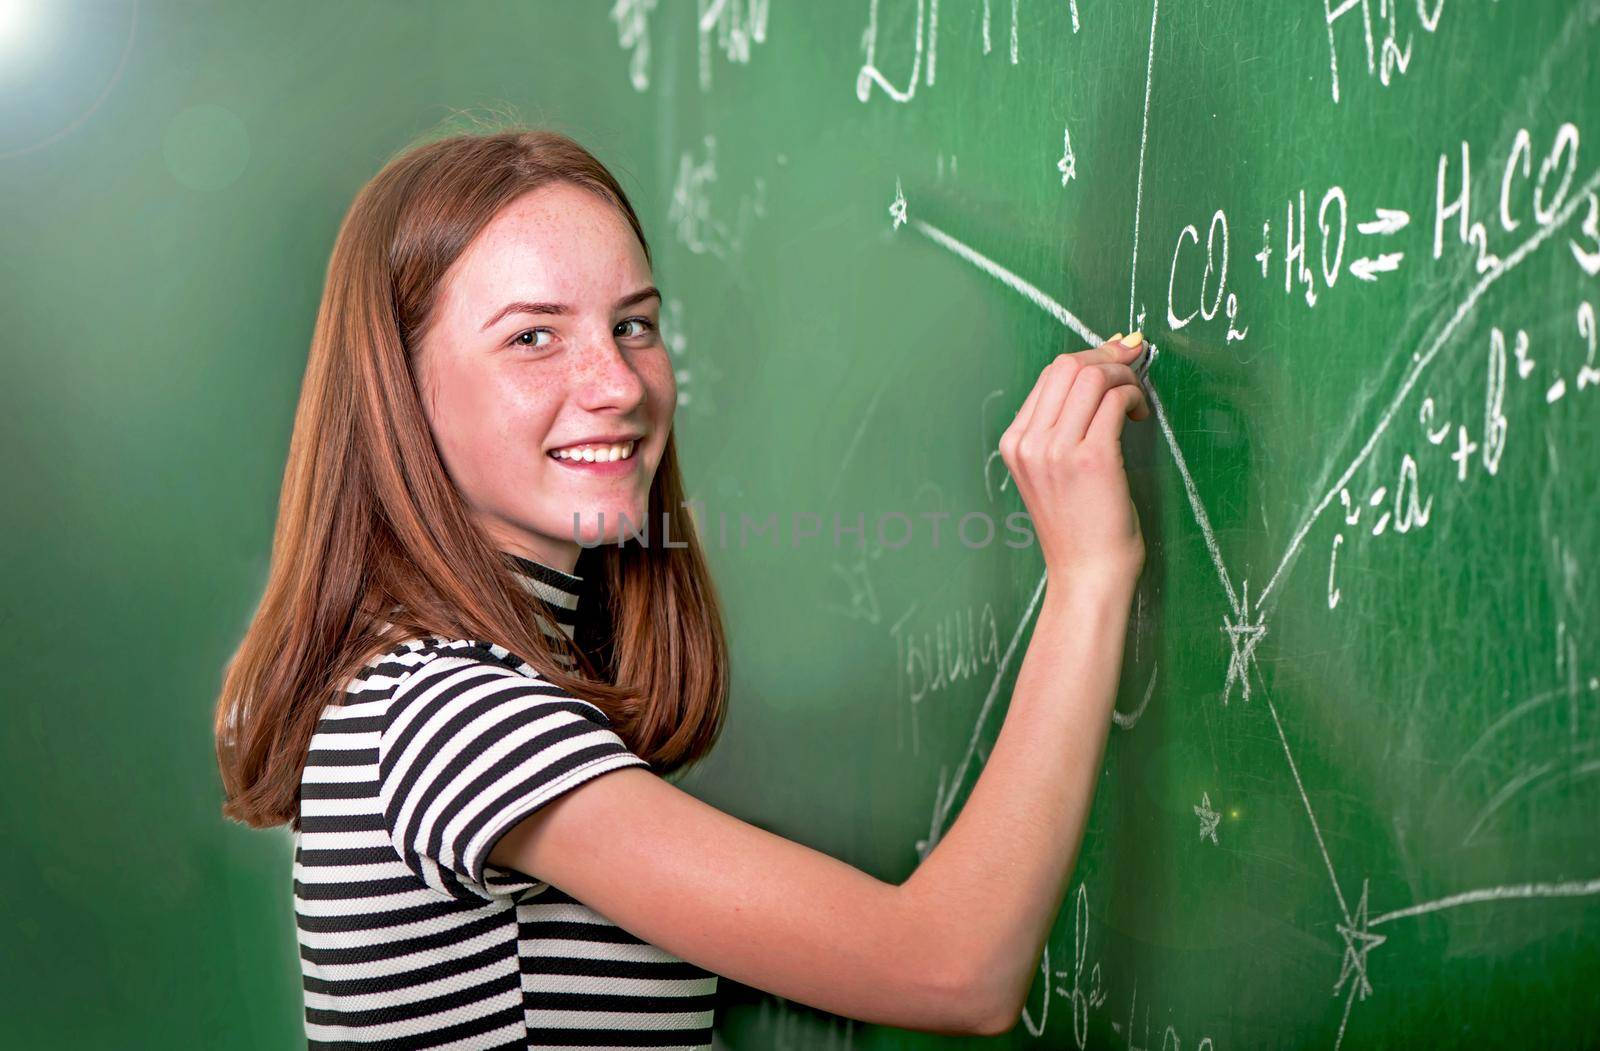 Student girl standing near clean blackboard in the classroom by aprilphoto